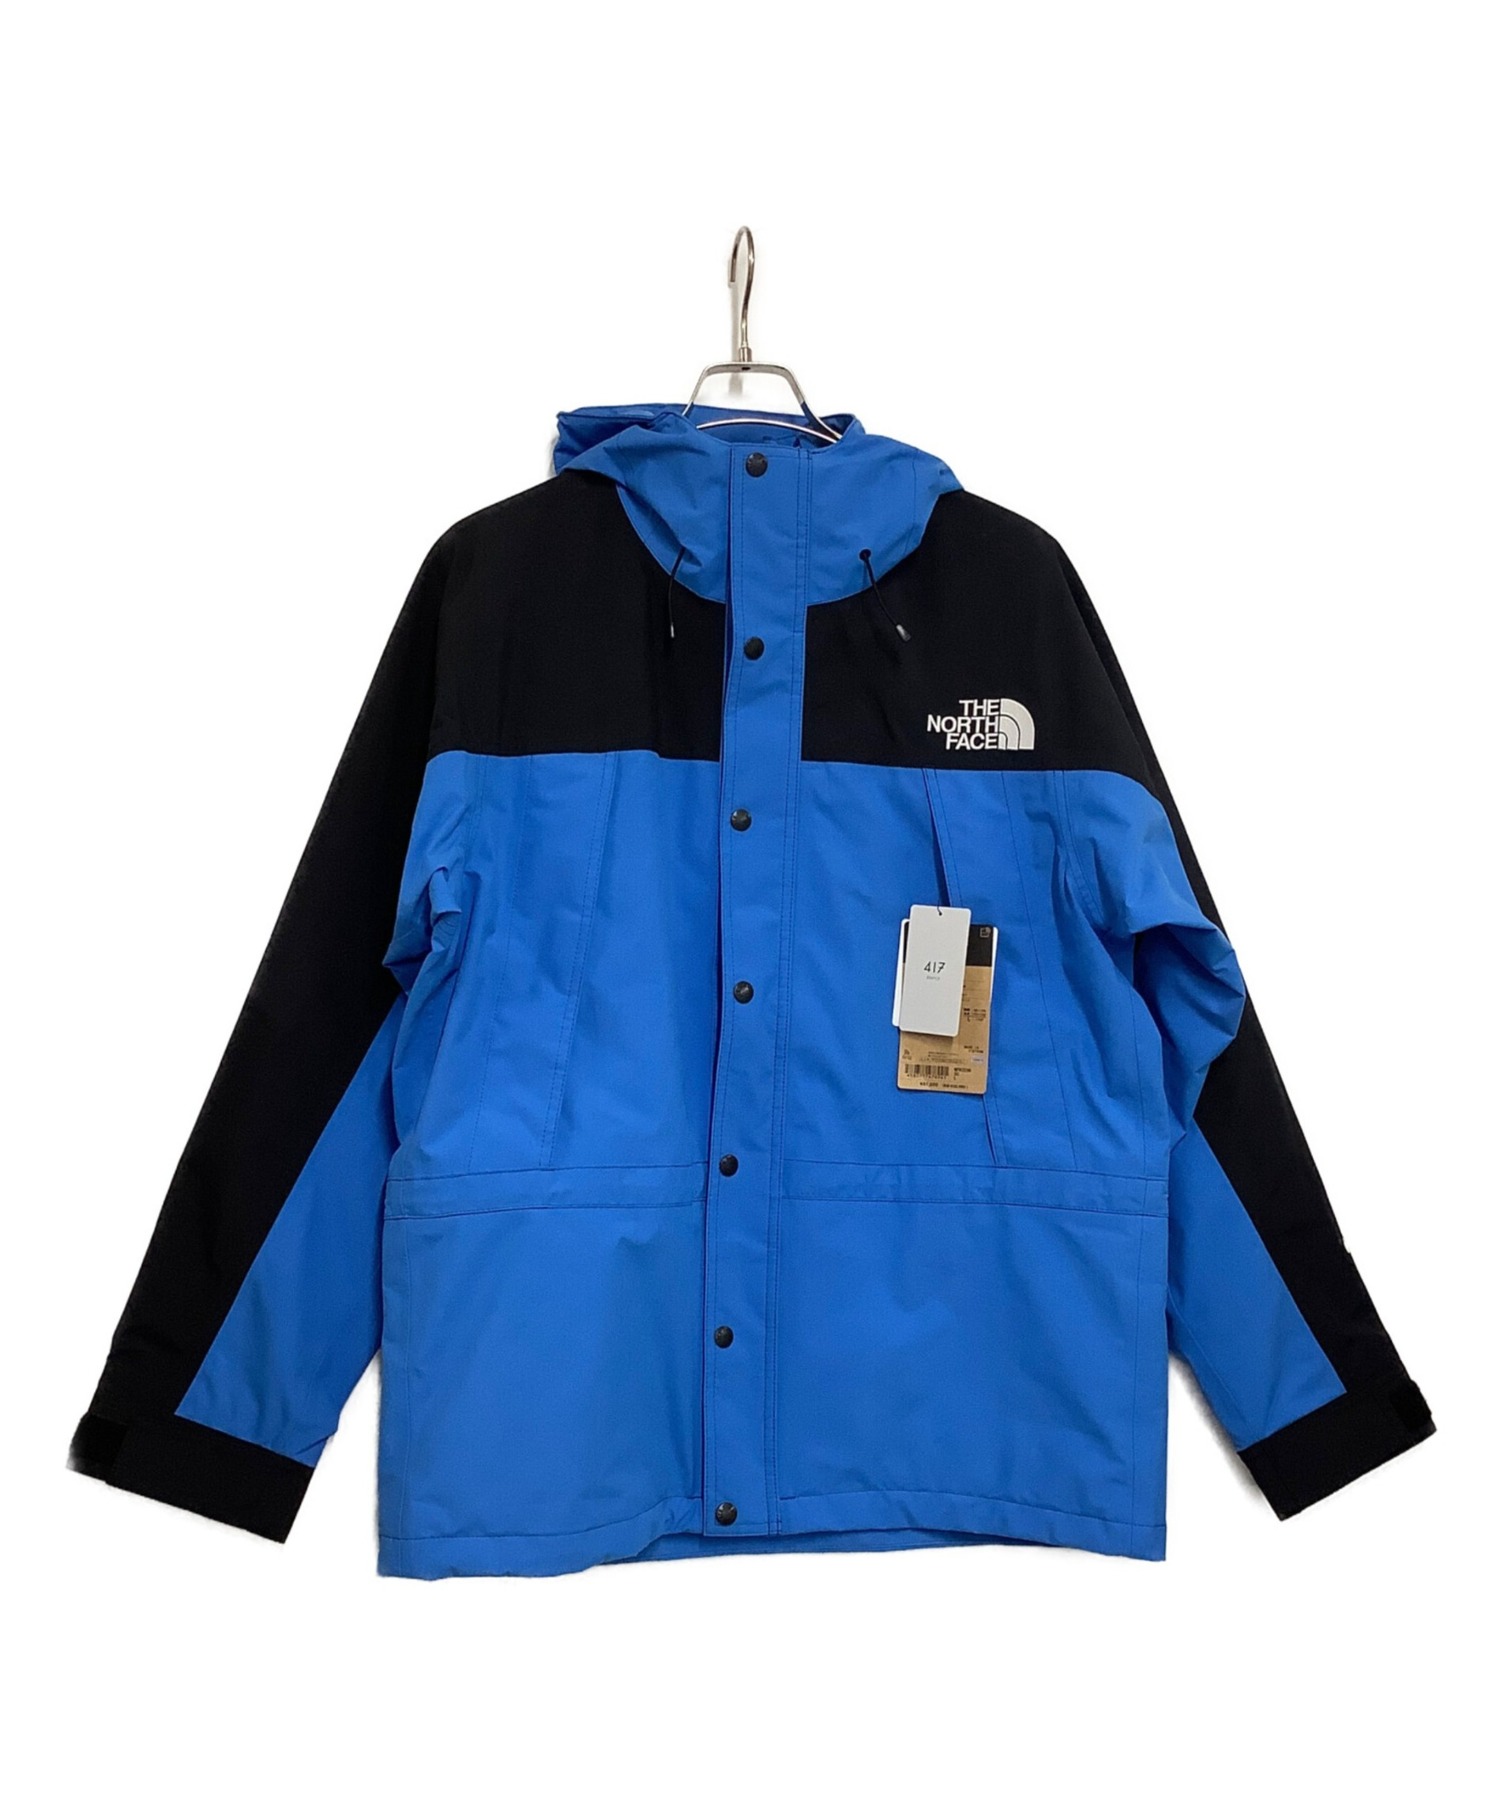 19SS NORTH FACE MOUNTAIN LIGHT JACKET